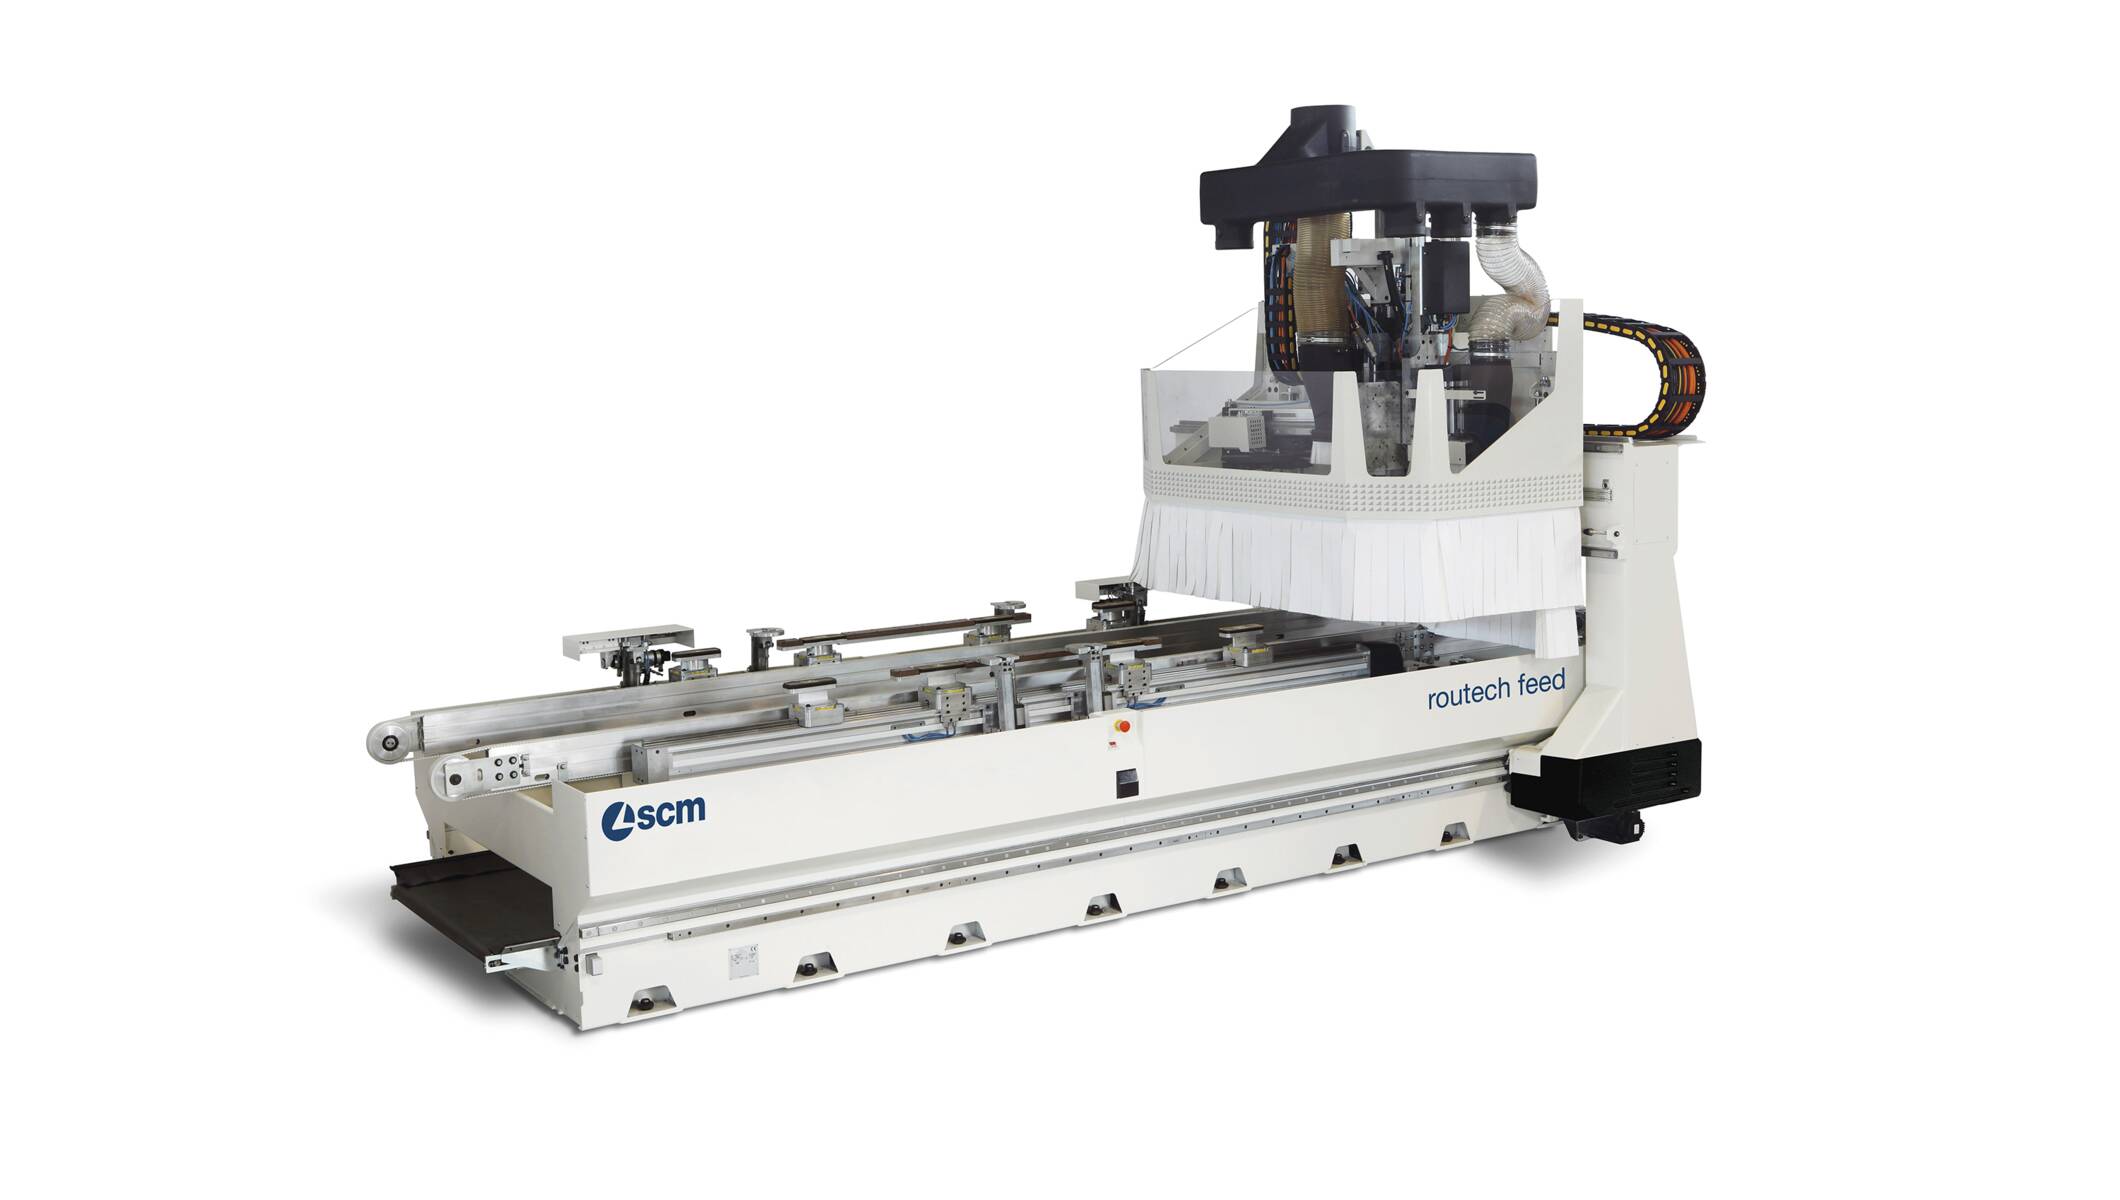 CNC Machining Centers - CNC Machining Centers for routing and drilling - routech feed